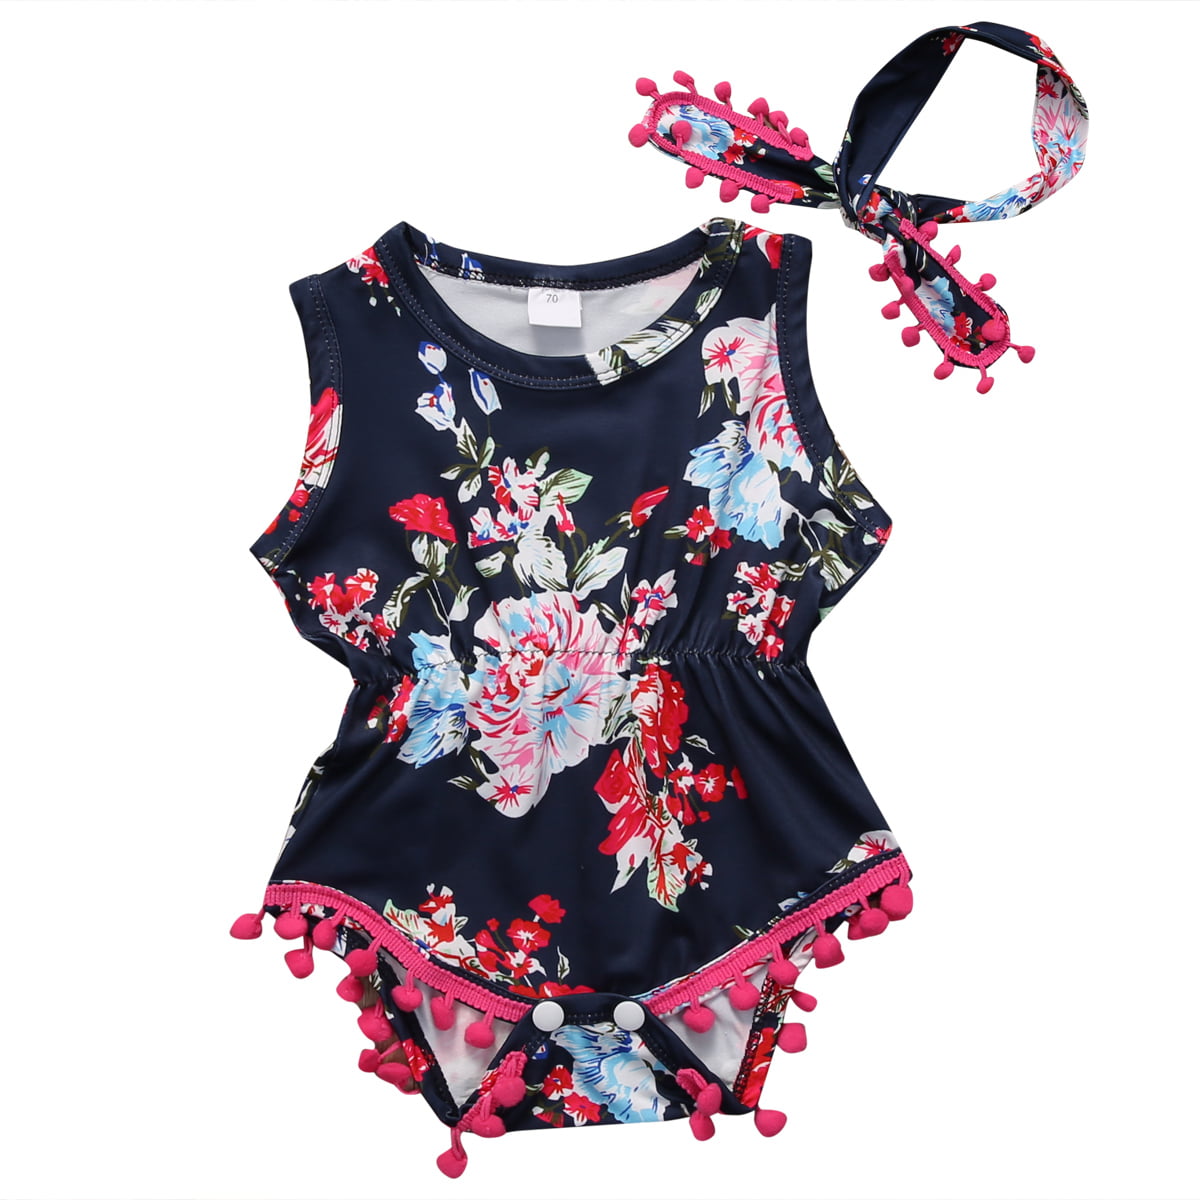 Baby s Cotton Bodysuit,One-Piece Sleeveless Floral Tassel Infan Romper Headbands Jumpsuit Outfits Set for Toddler,Newborn 